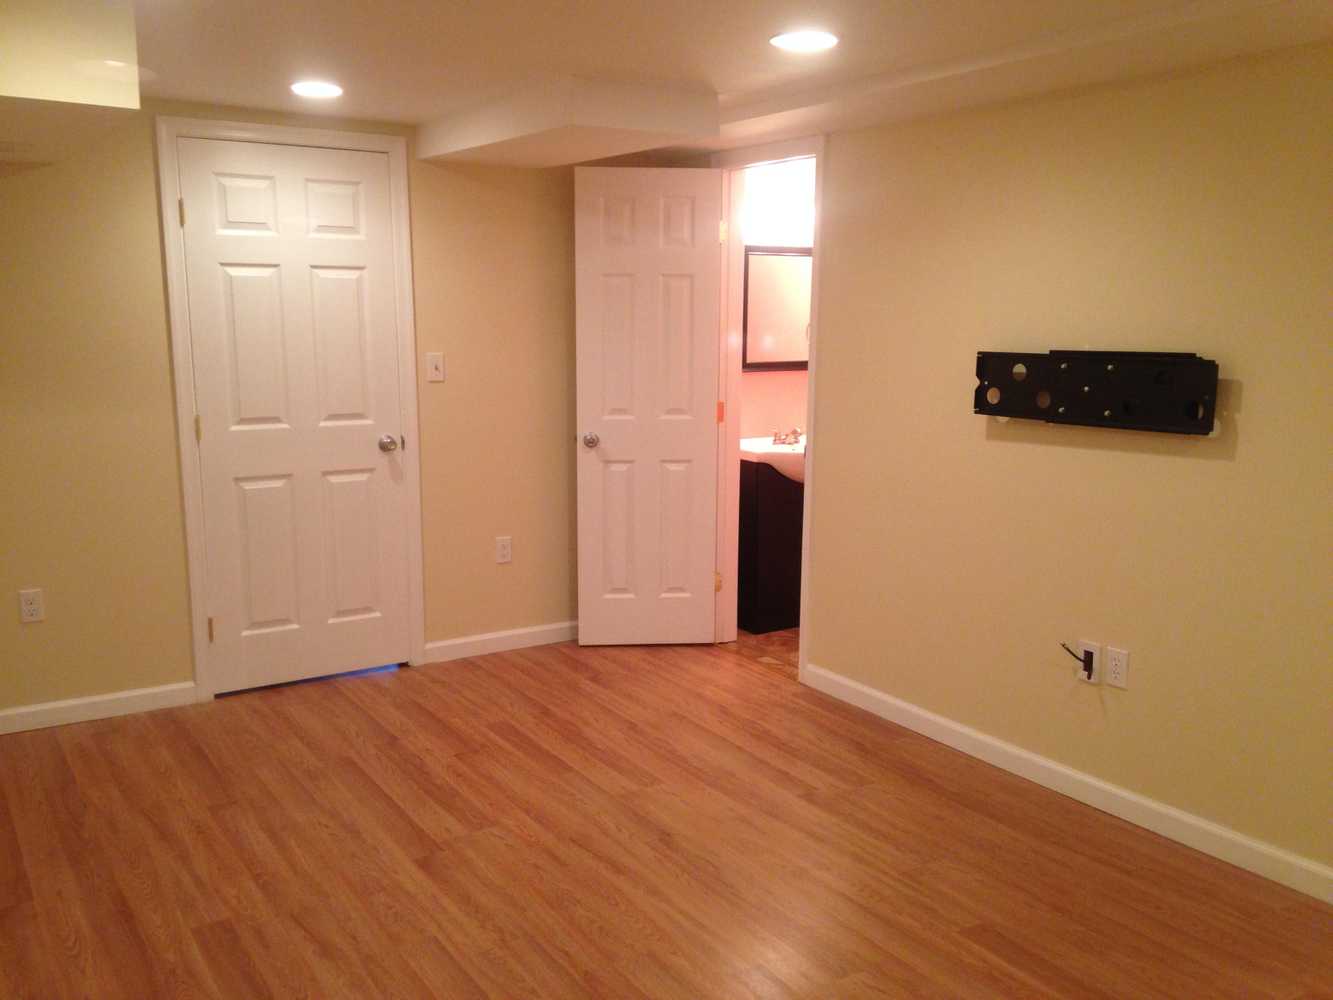 Photos from Five Star Quality Remodeling LLC